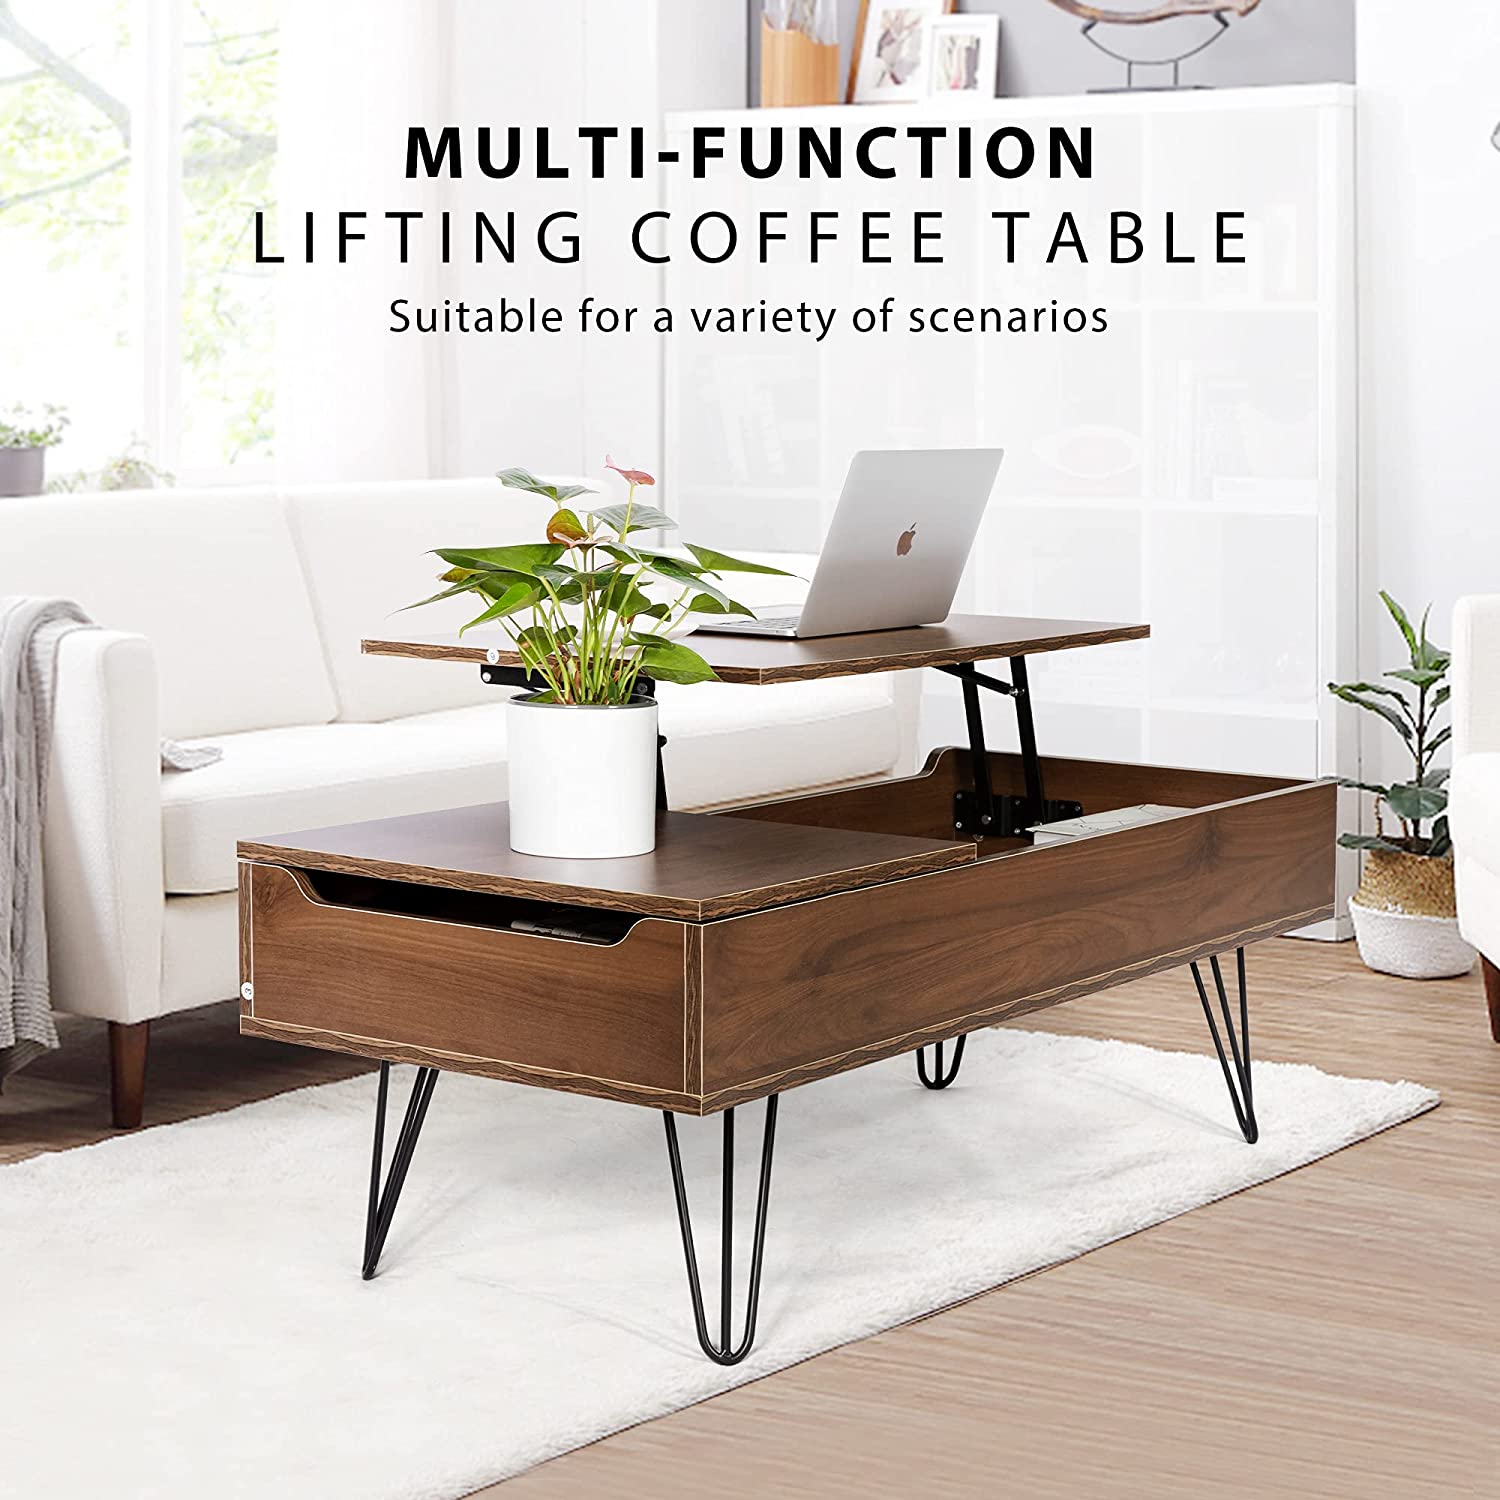 Dark Oak Lift Top Simple Coffee Table and Dining Table with Storage Function Suitable for Living Room Office Small Apartment